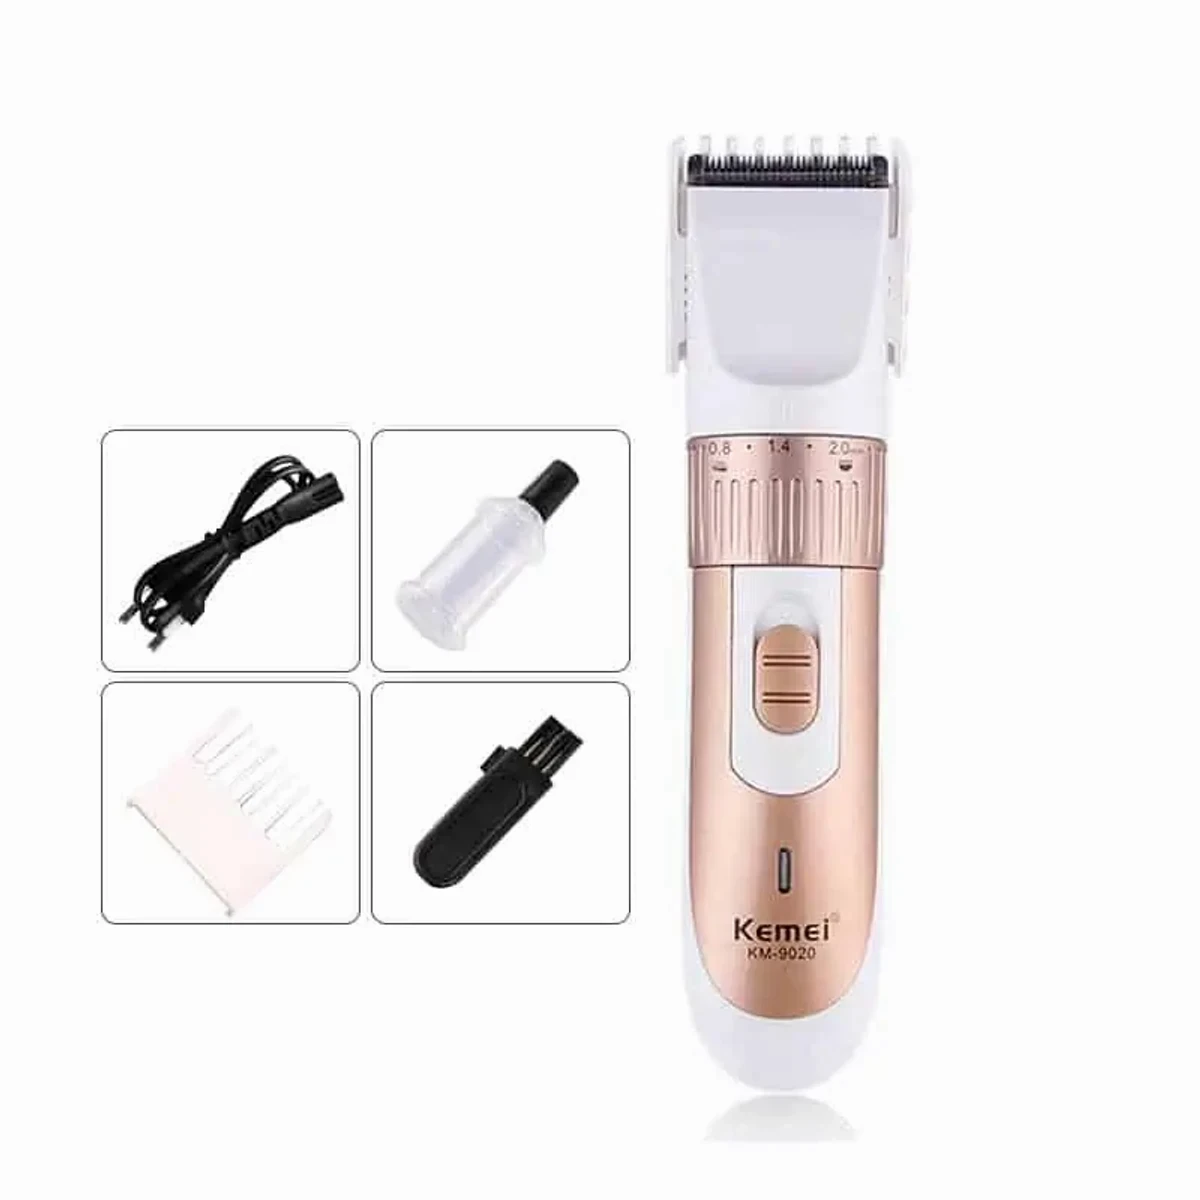 KEMEI KM-9020 RECHARGEABLE HAIR TRIMMER